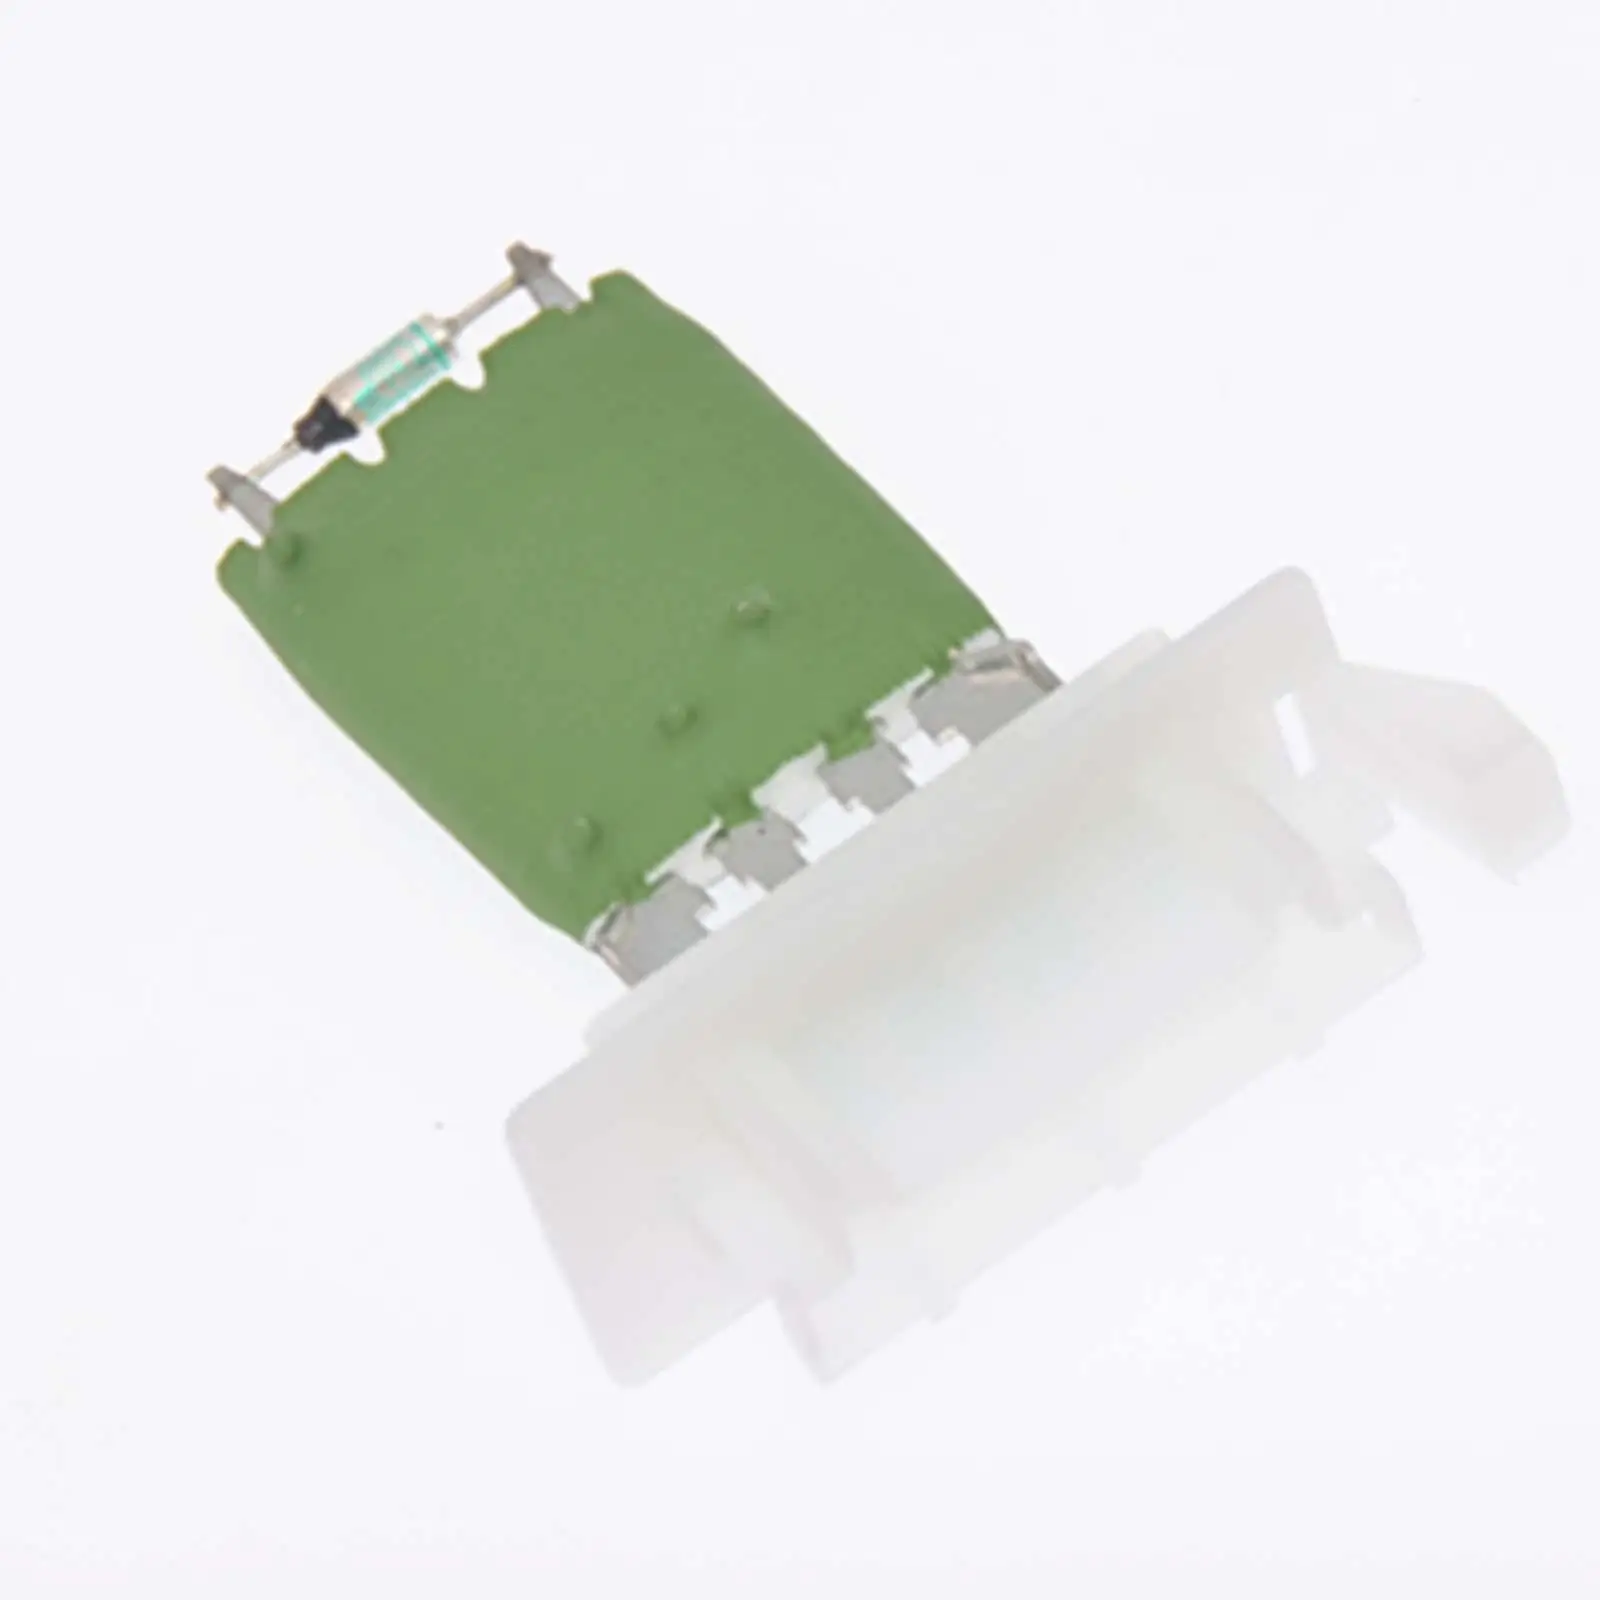 Automotive Heater Blower Motor Resistor 1698200397 Easy to Install High performance for Mercedes B-Class 2005-2011